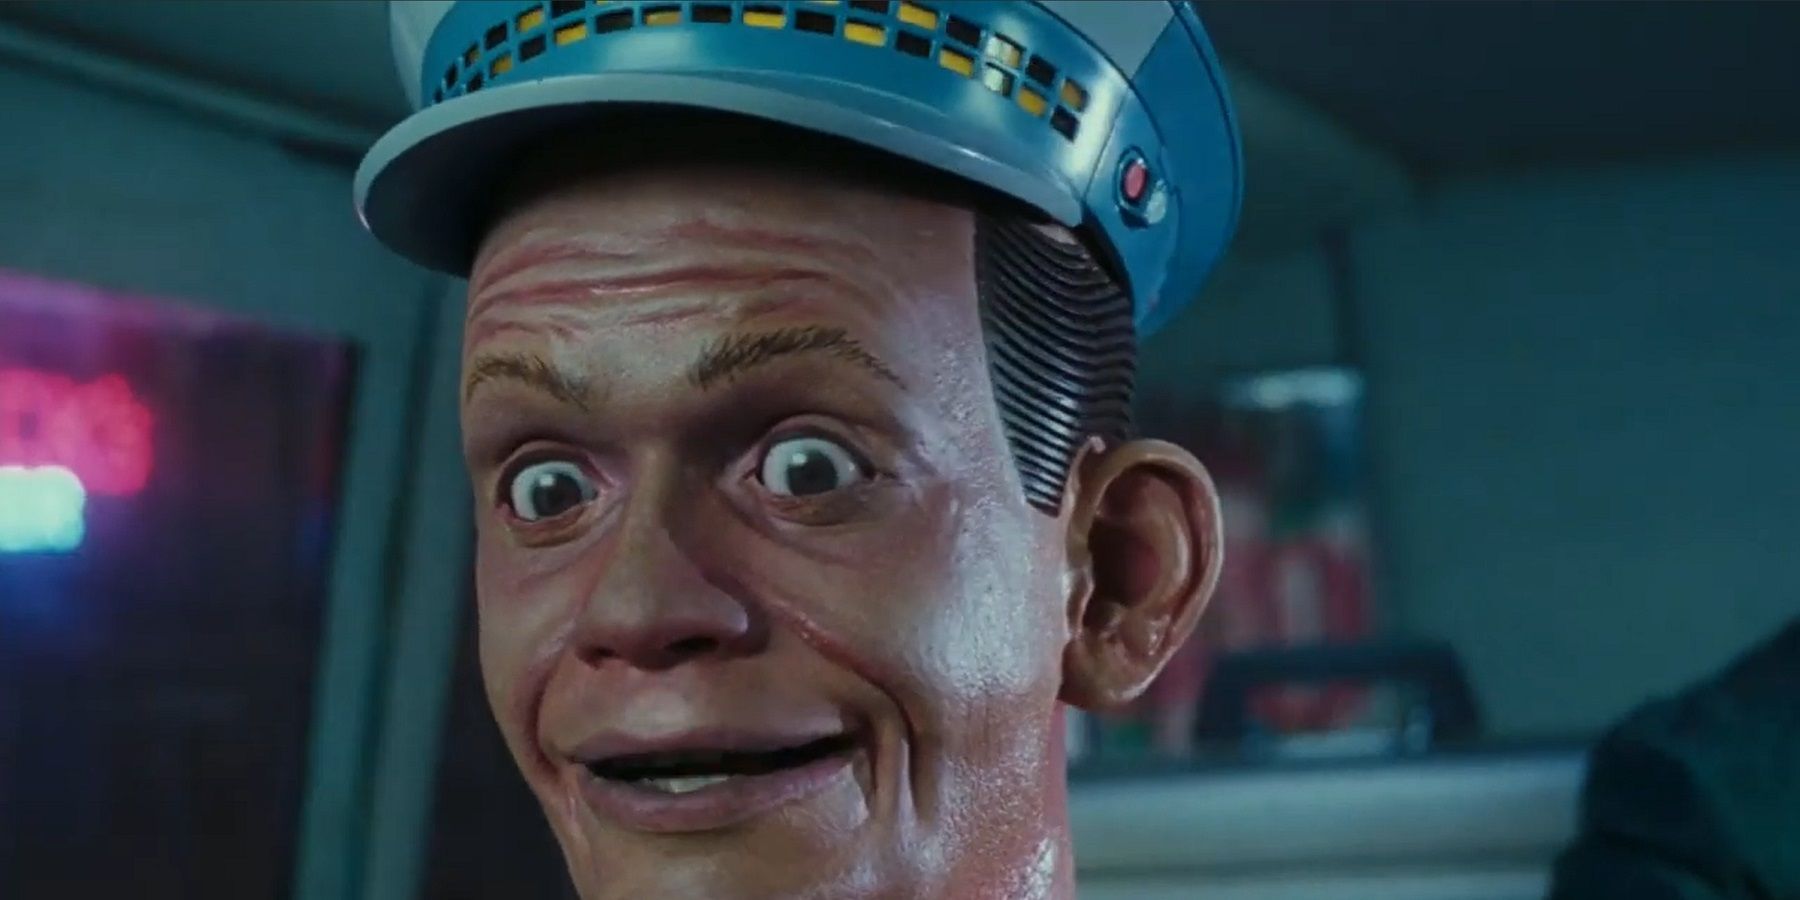 The robot taxi in Total Recall